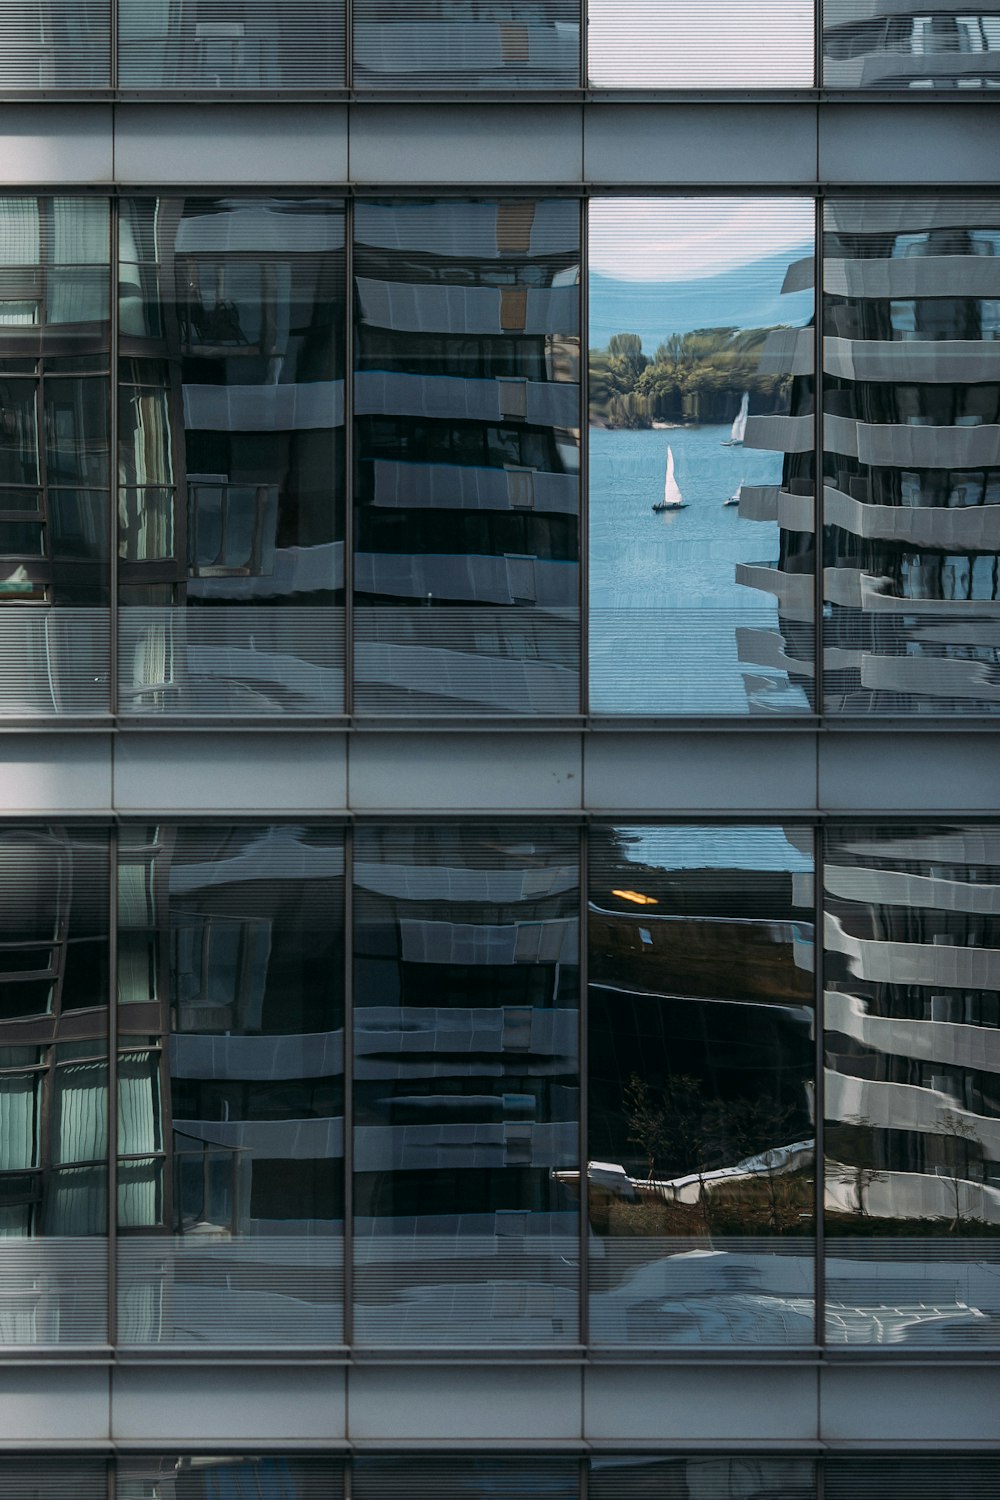 sailing boat reflecting on building's wall